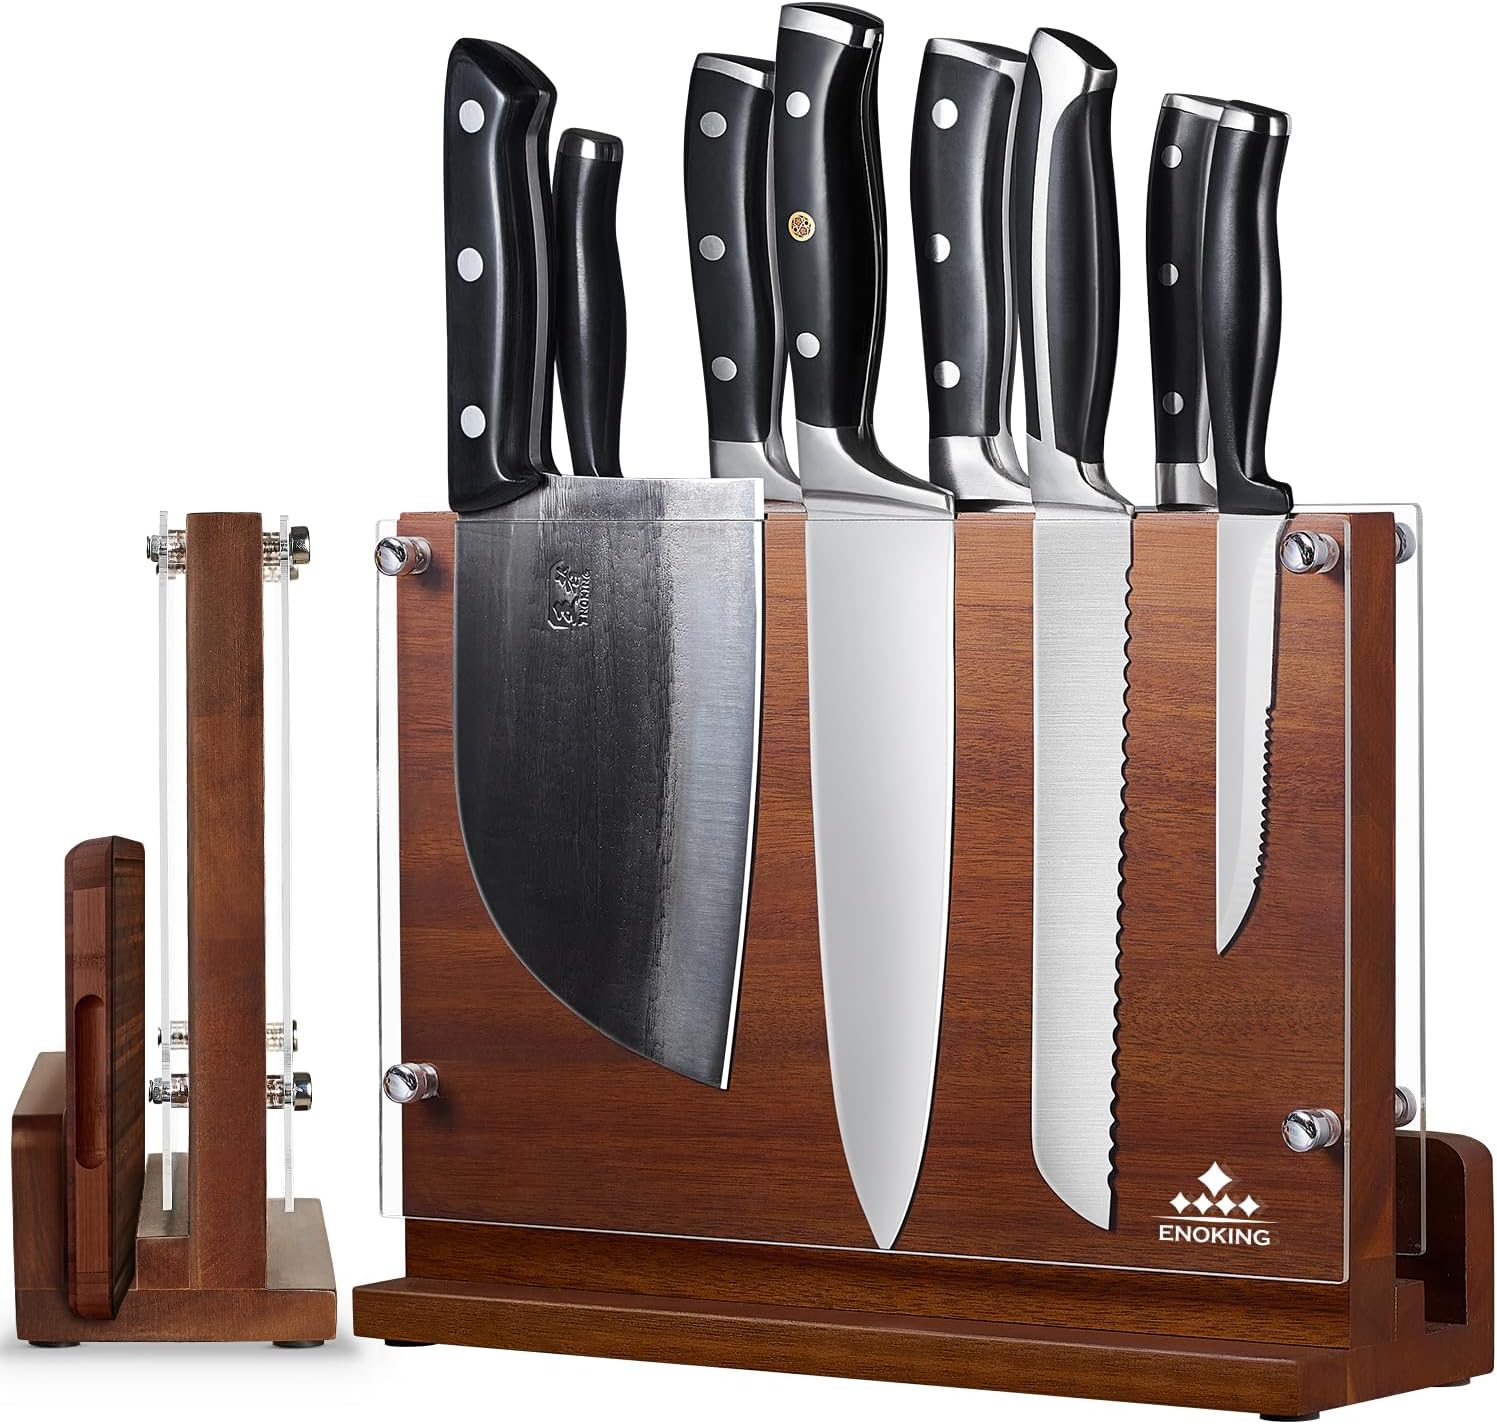 This knife block is attractive and well built. It is heavy, sturdy, and stable. It is an attractive display for knives and provides easy access to them. The knives are held in place by magnets and acrylic sheets. One cannot knock the knives off accidentally. Knives can be stored on both sides of the wooden block, doubling the capacity. I have five knives on one side, and four on the back with the cleaver taking up most of the space. The acrylic sheet cannot come off for cleaning, hence the four-